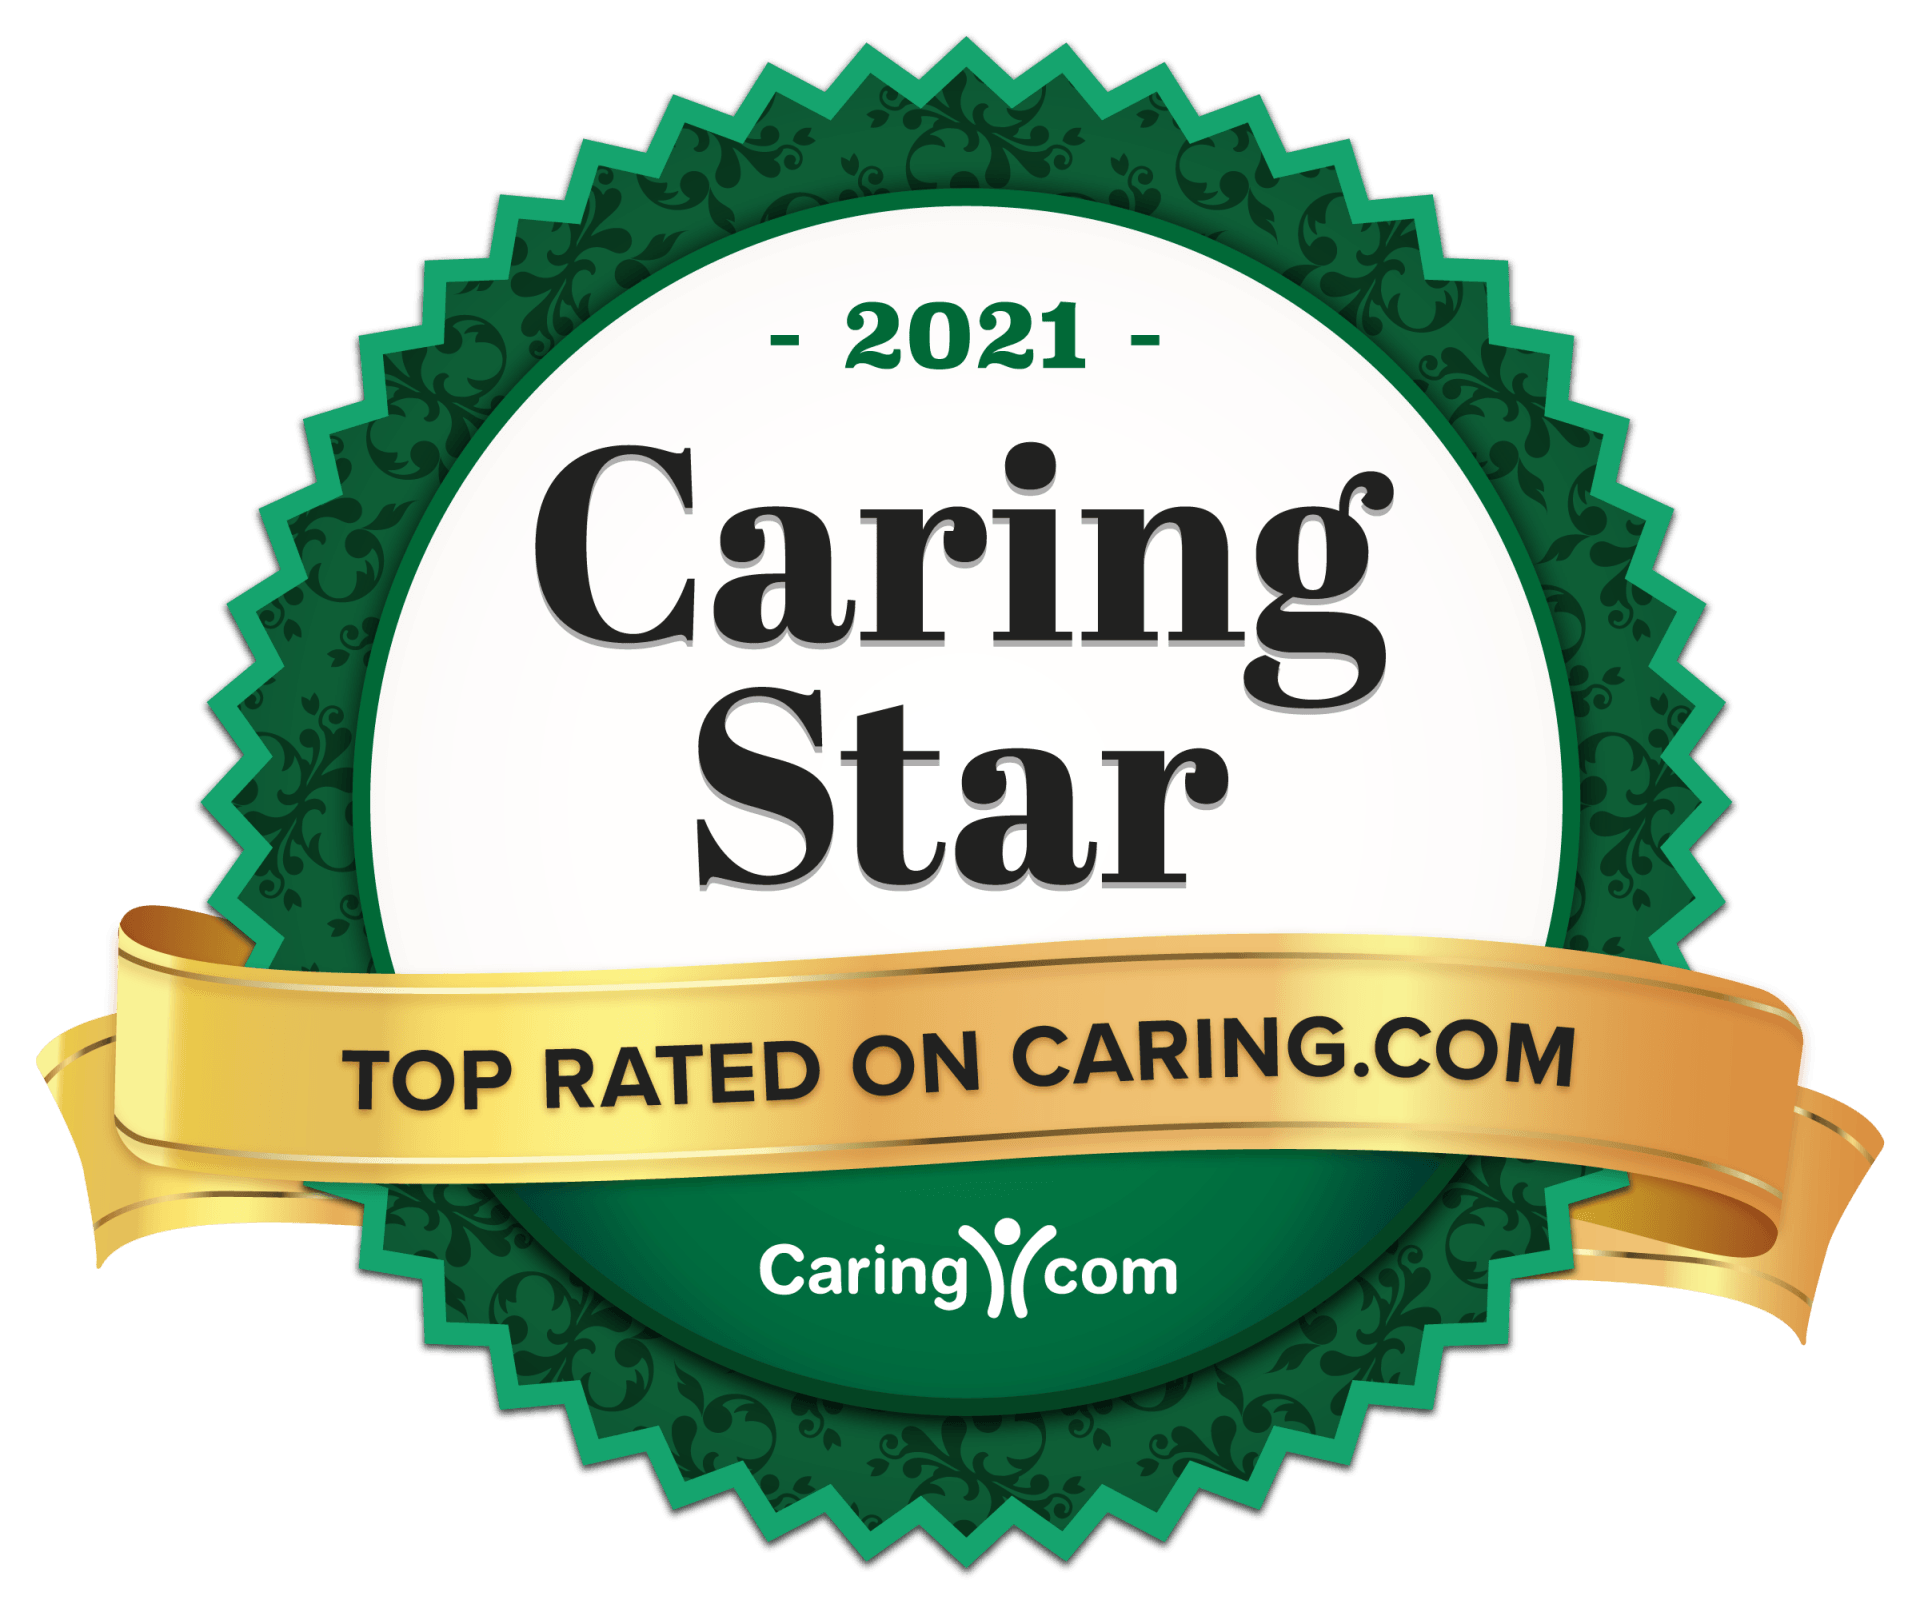 Elder Care in-home care Caring Stars of 2021